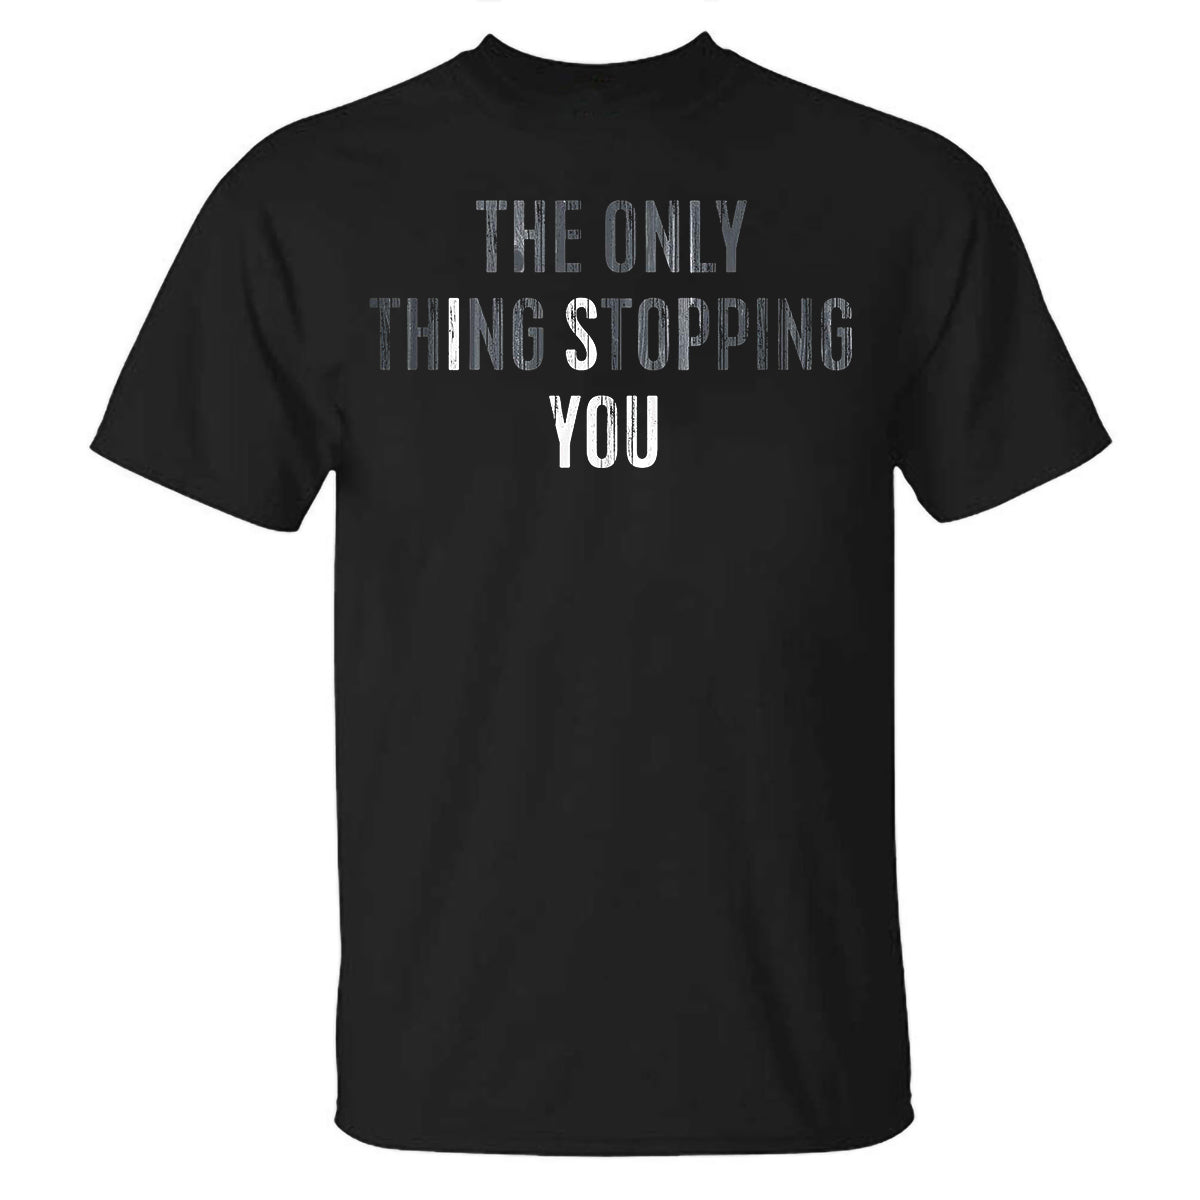 The Only Thing Stopping You Printed T-shirt